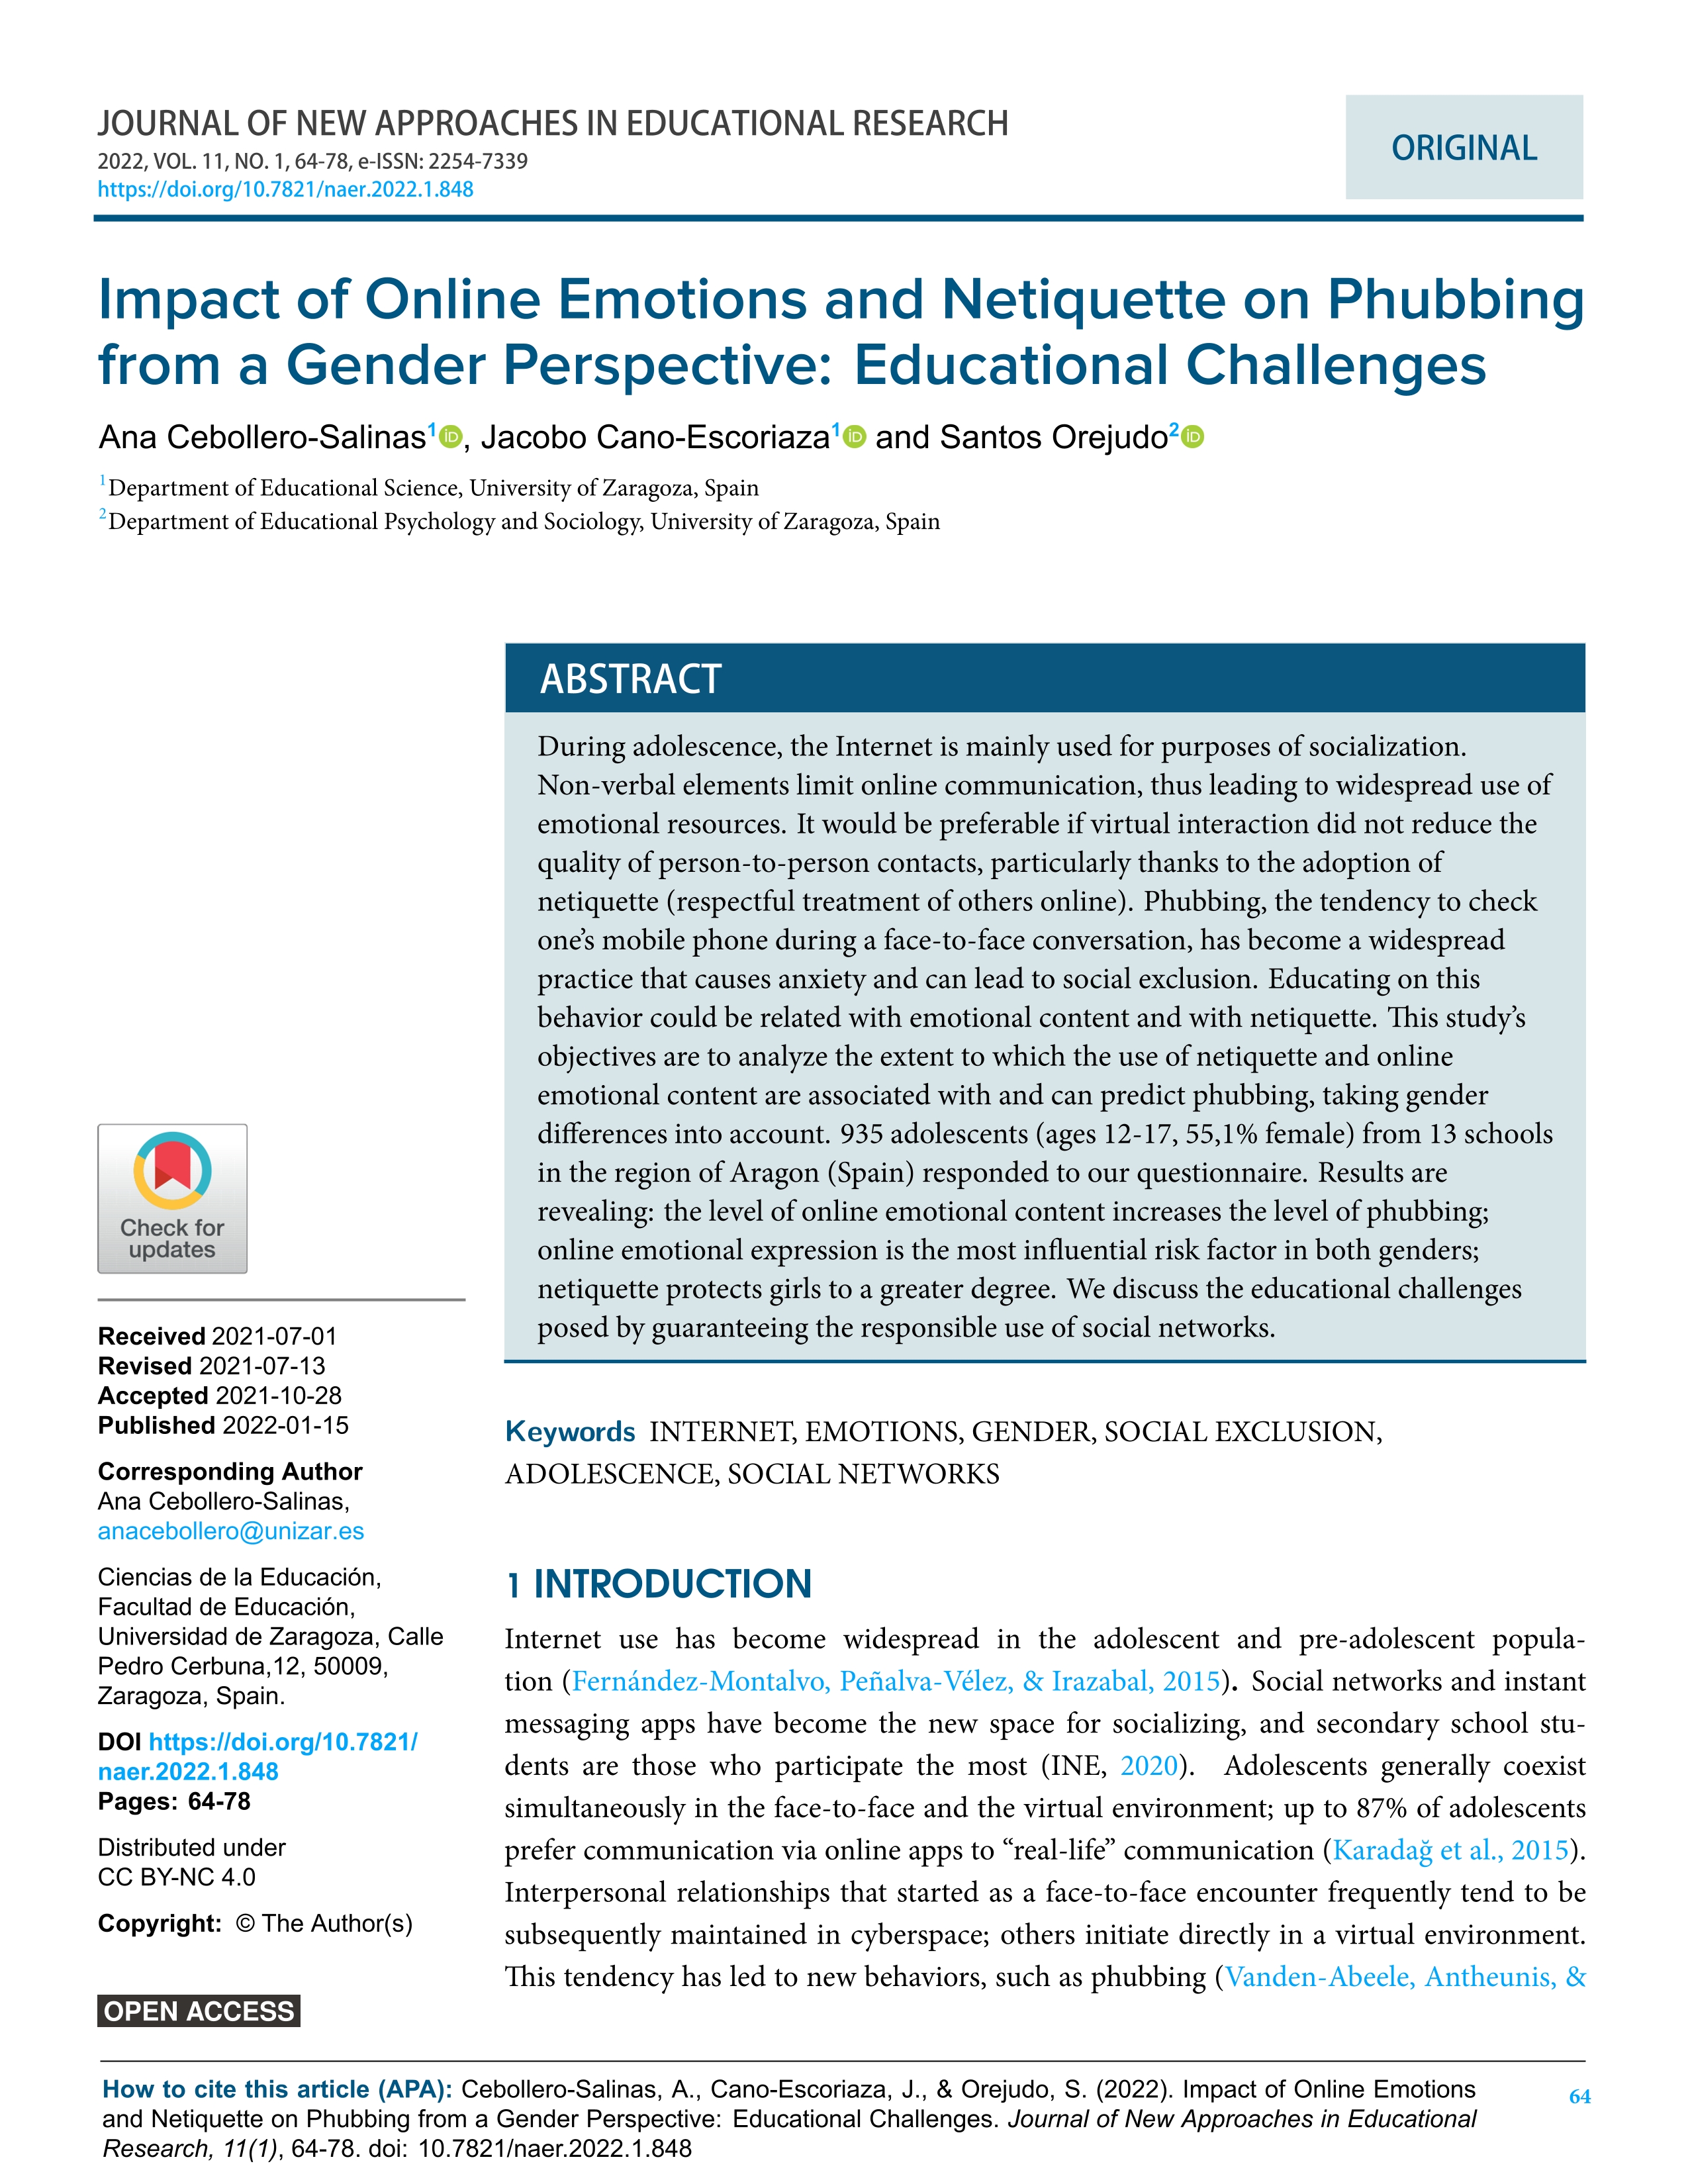 Impact of online emotions and netiquette on phubbing from a gender perspective: Educational challenges